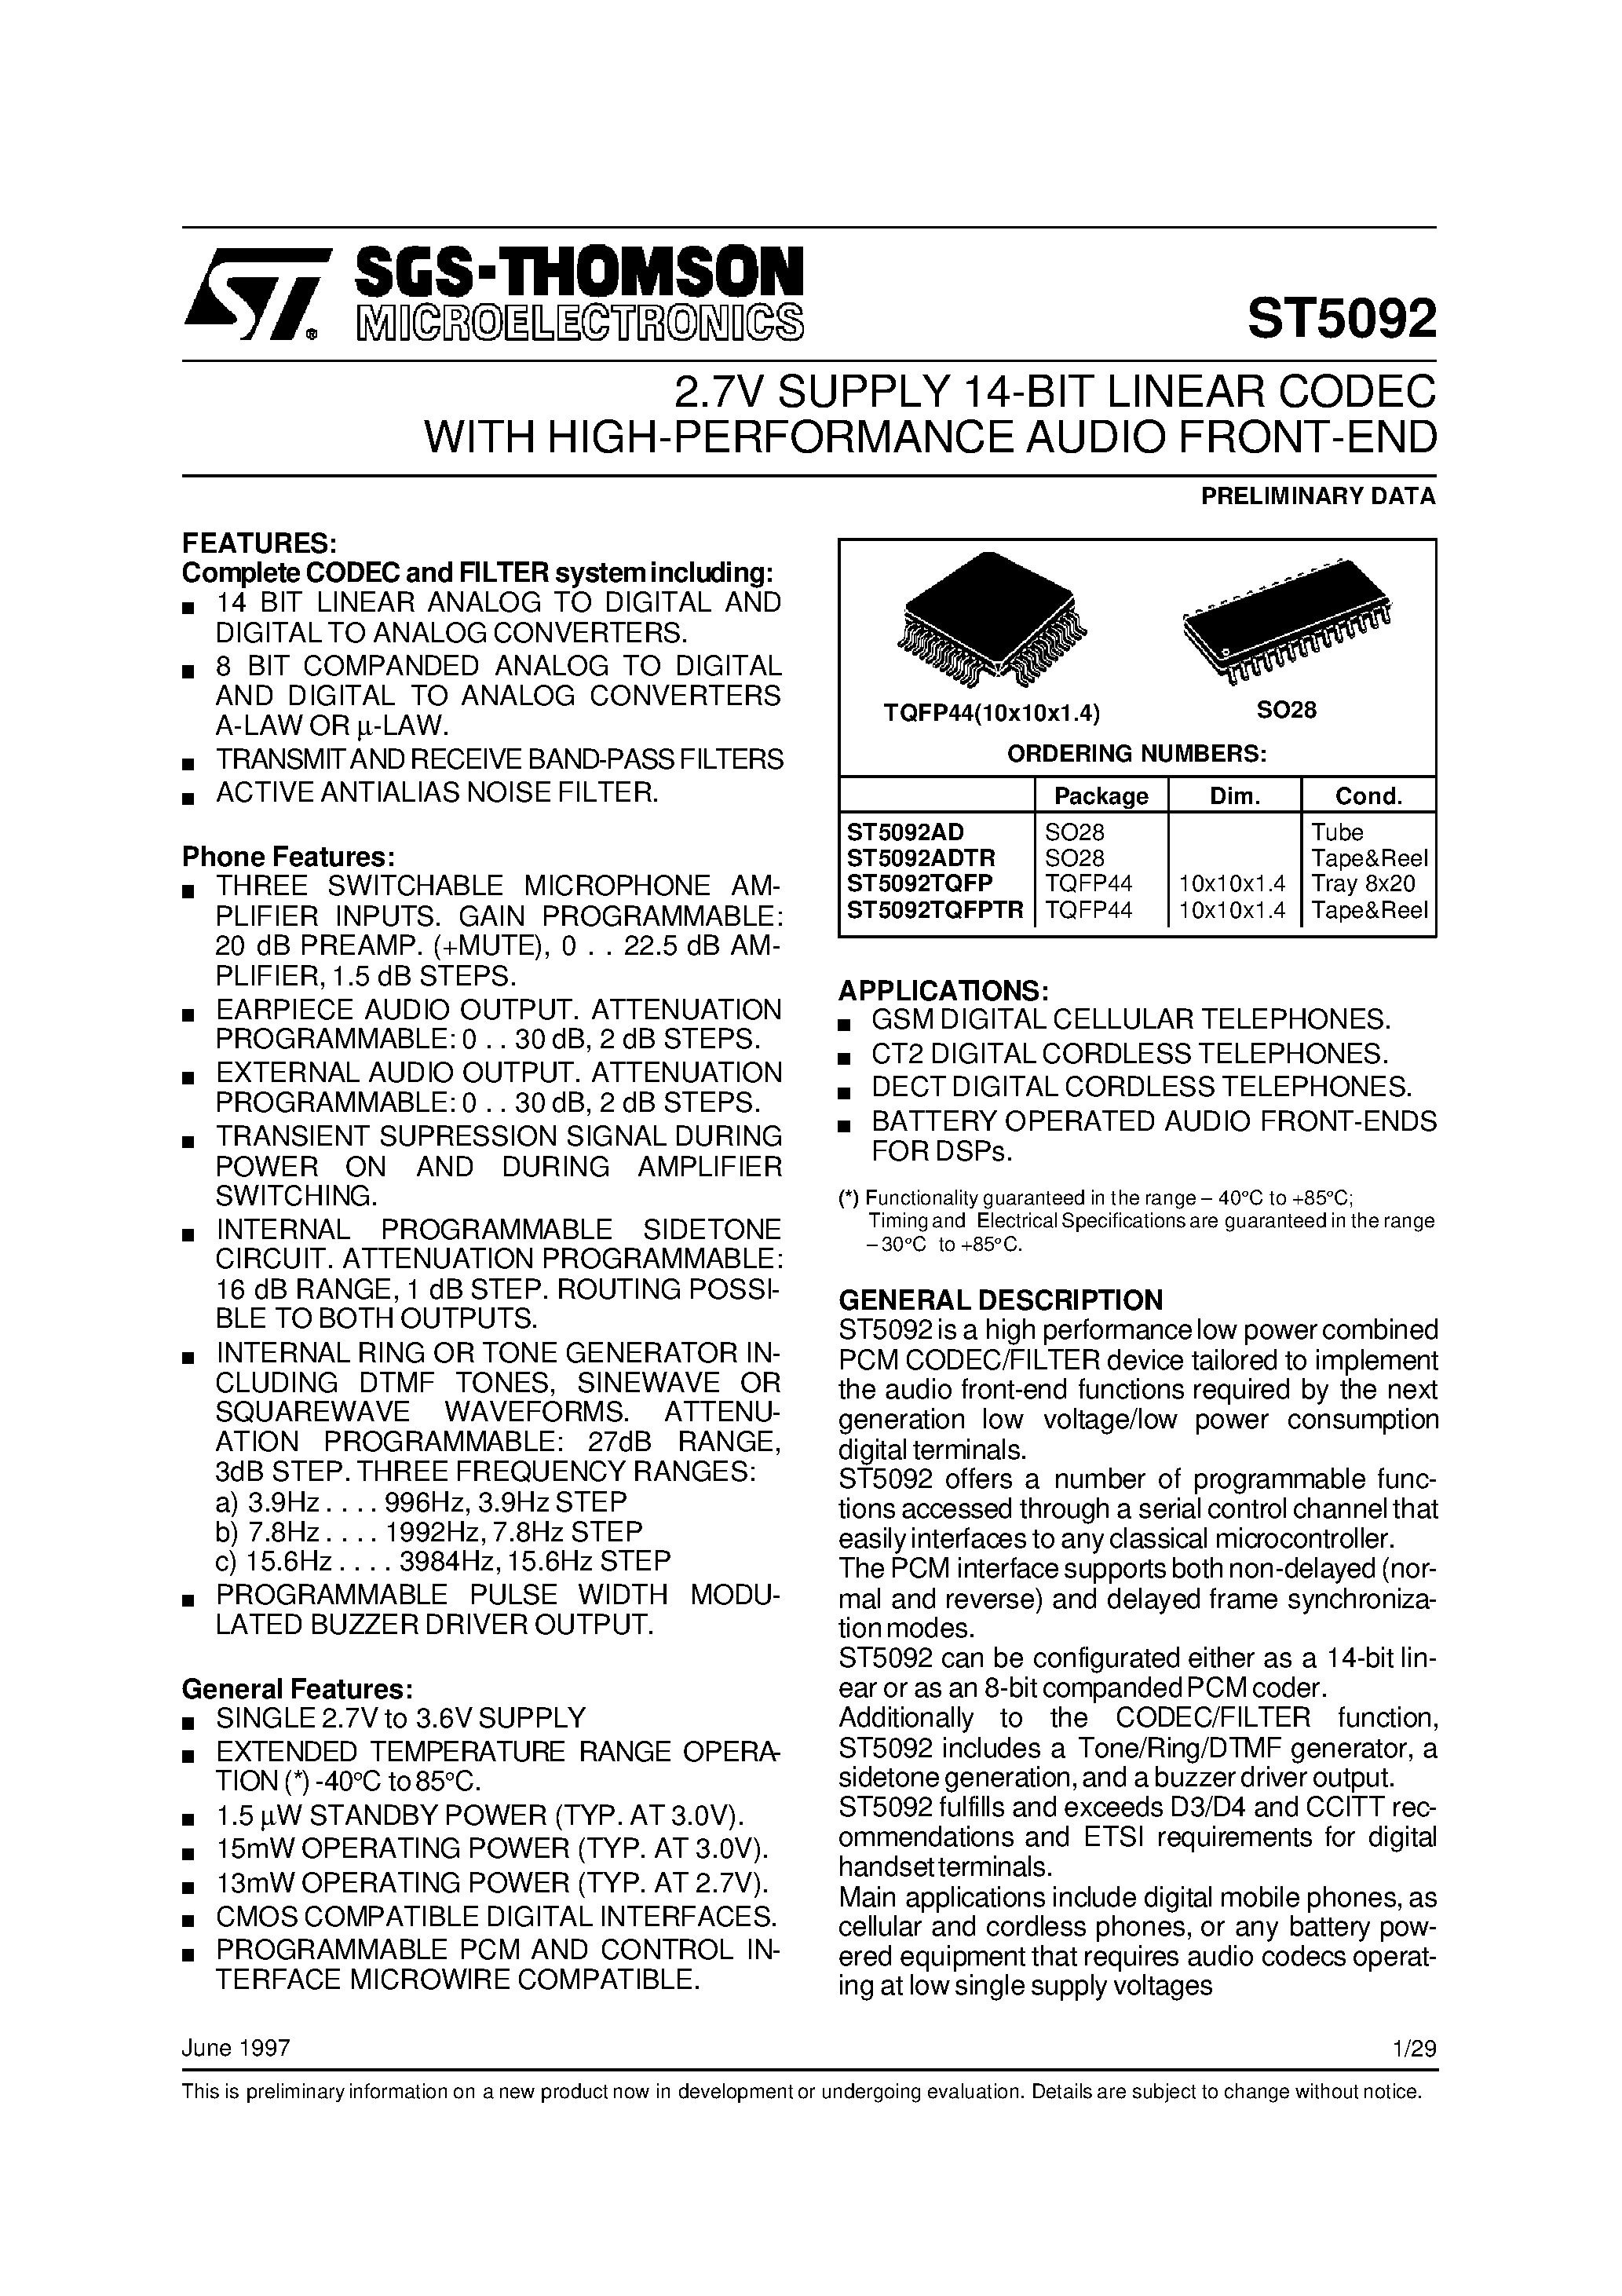 Даташит ST5092 - 2.7V SUPPLY 14-BIT LINEAR CODEC WITH HIGH-PERFORMANCE AUDIO FRONT-END страница 1